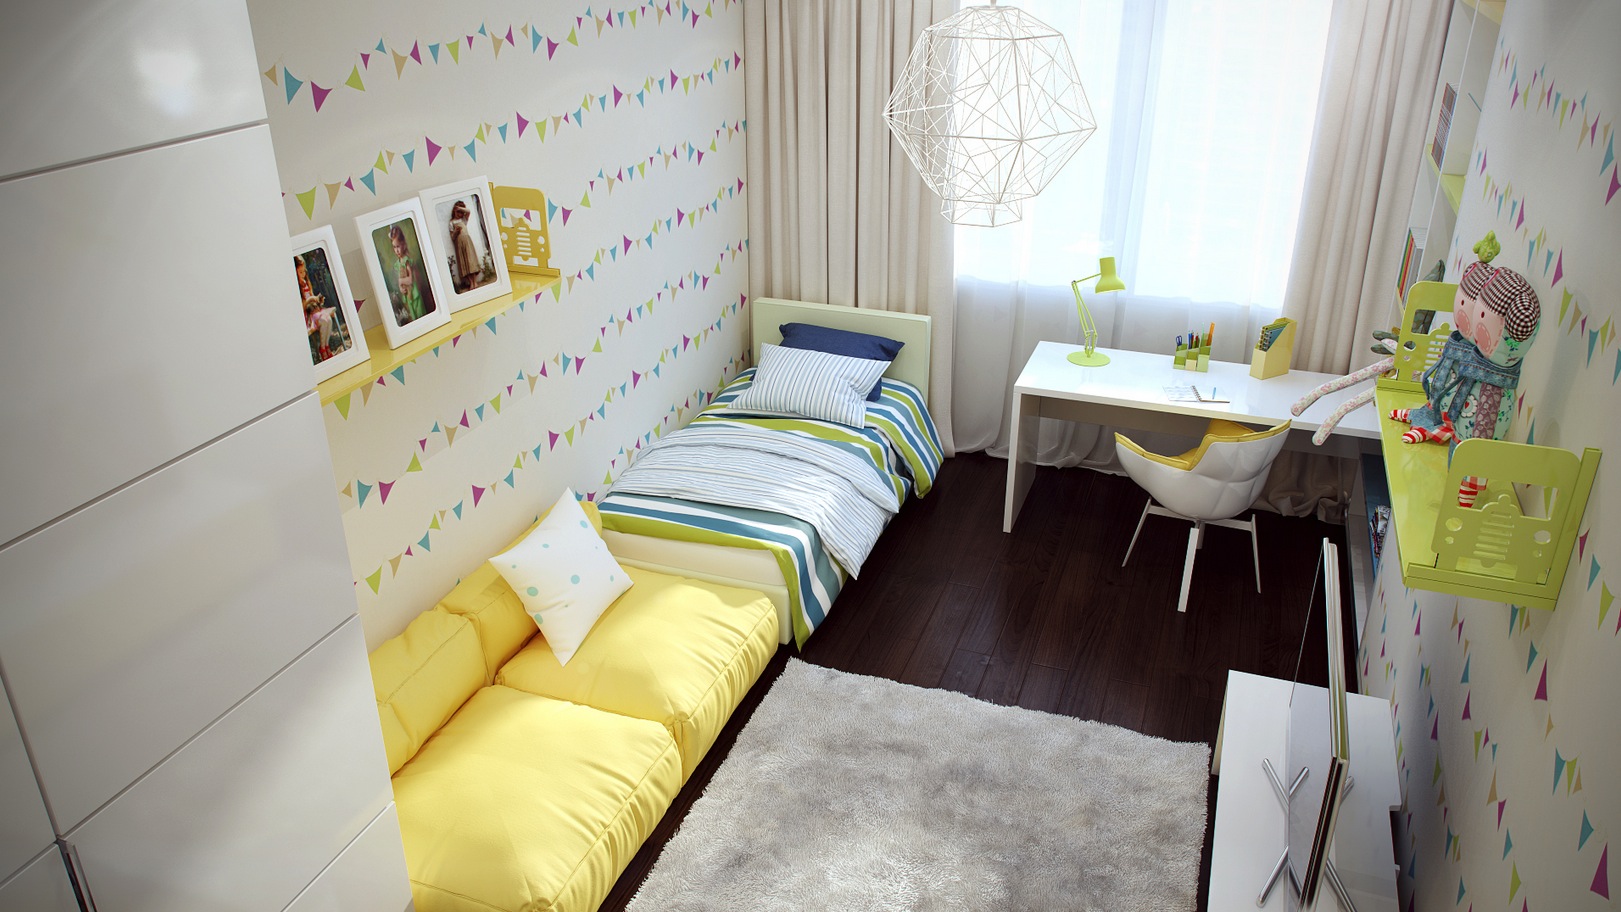 Casting Color Over Kids Rooms